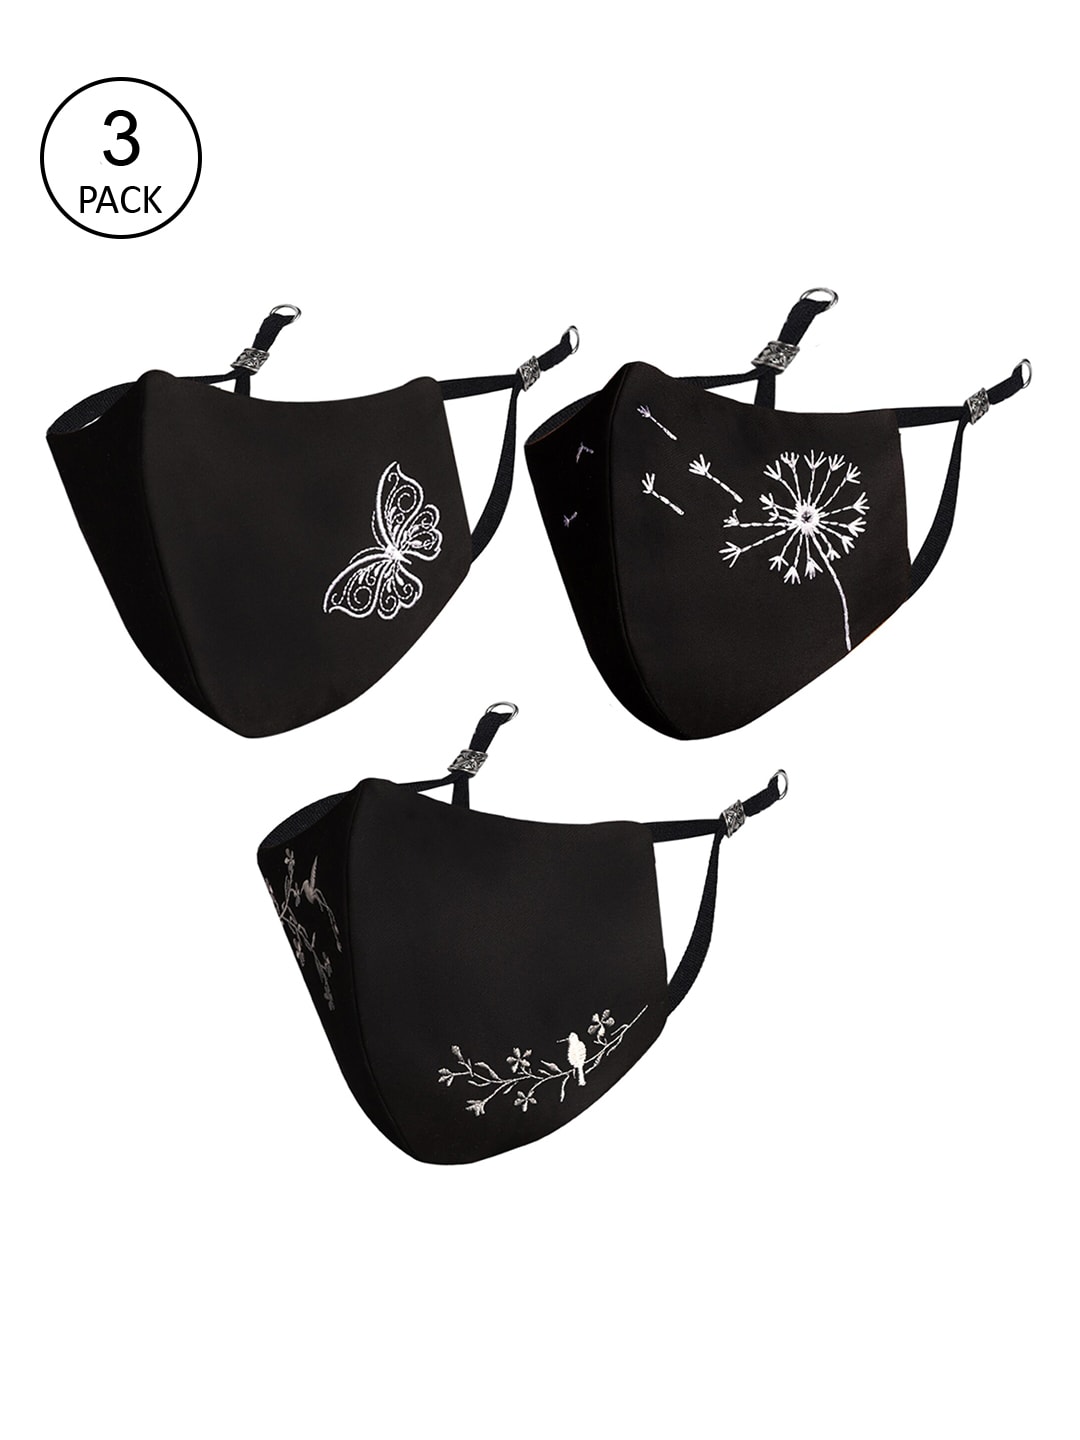 MASQ Pack of 3 Black Embroidered 4-Ply Reusable Pure Cotton Cloth Masks Price in India